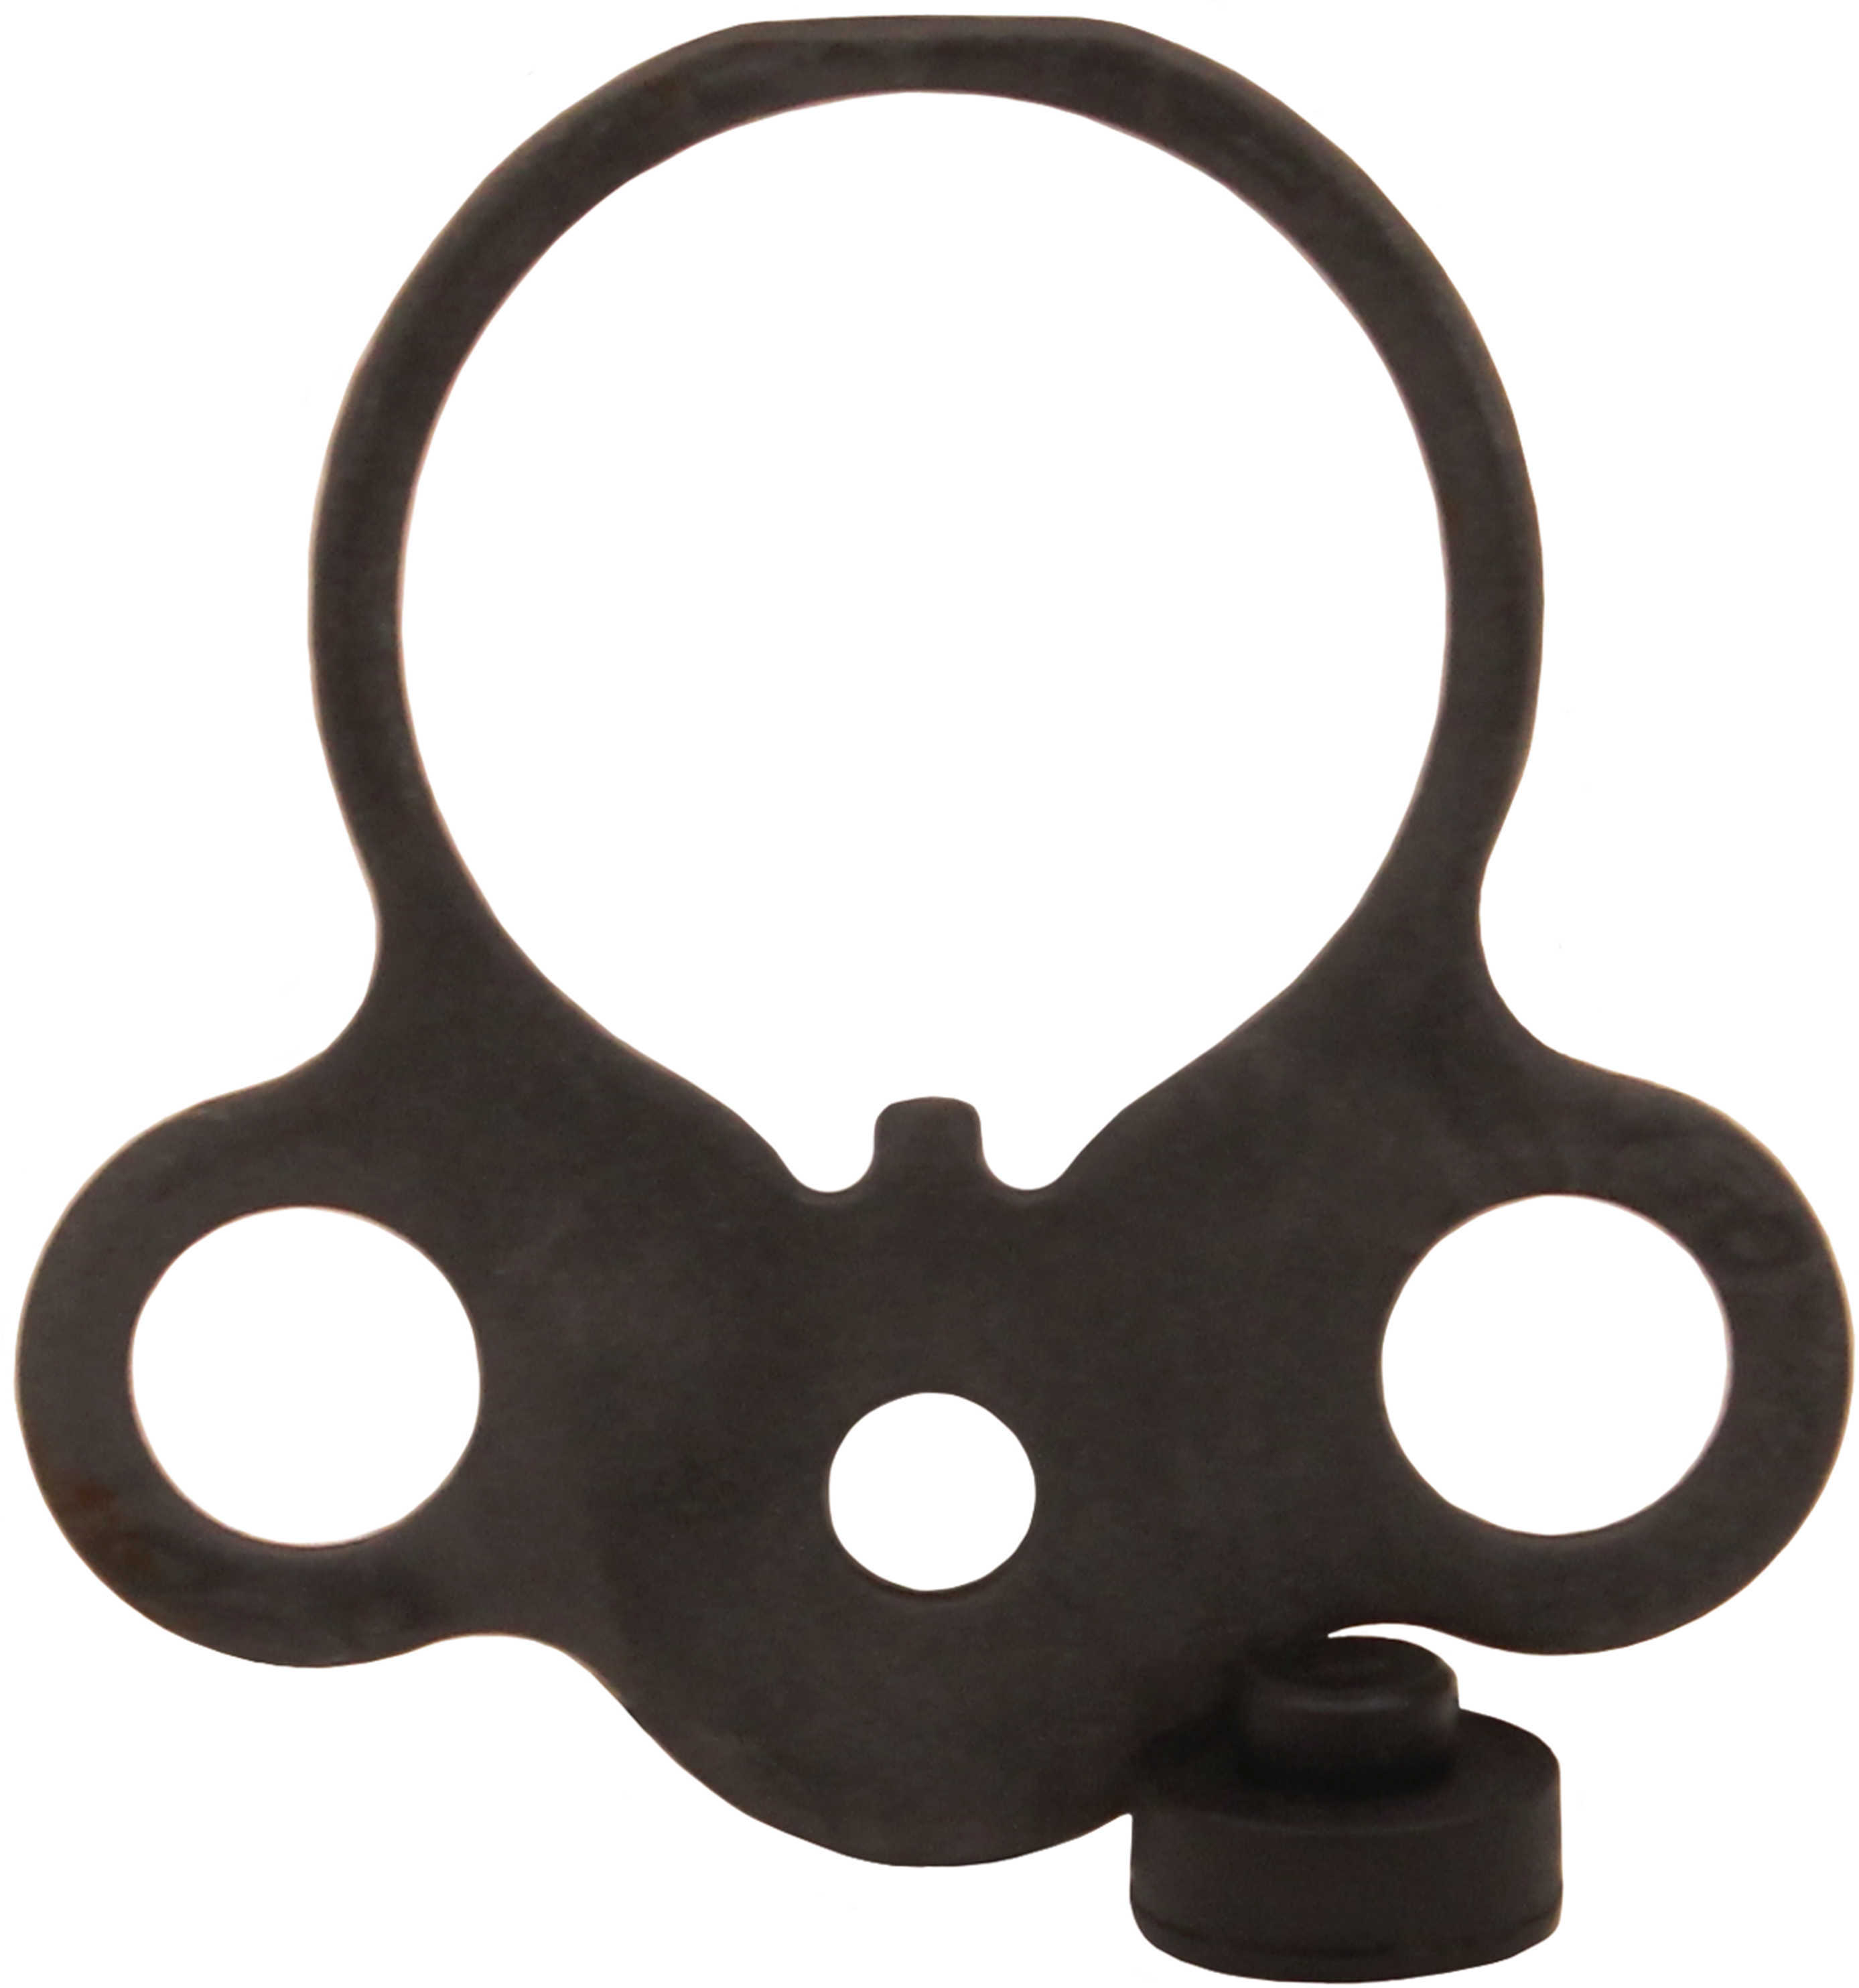 ProMag Sling Plate Single Point Attachment Ambidextrous Black PM140A